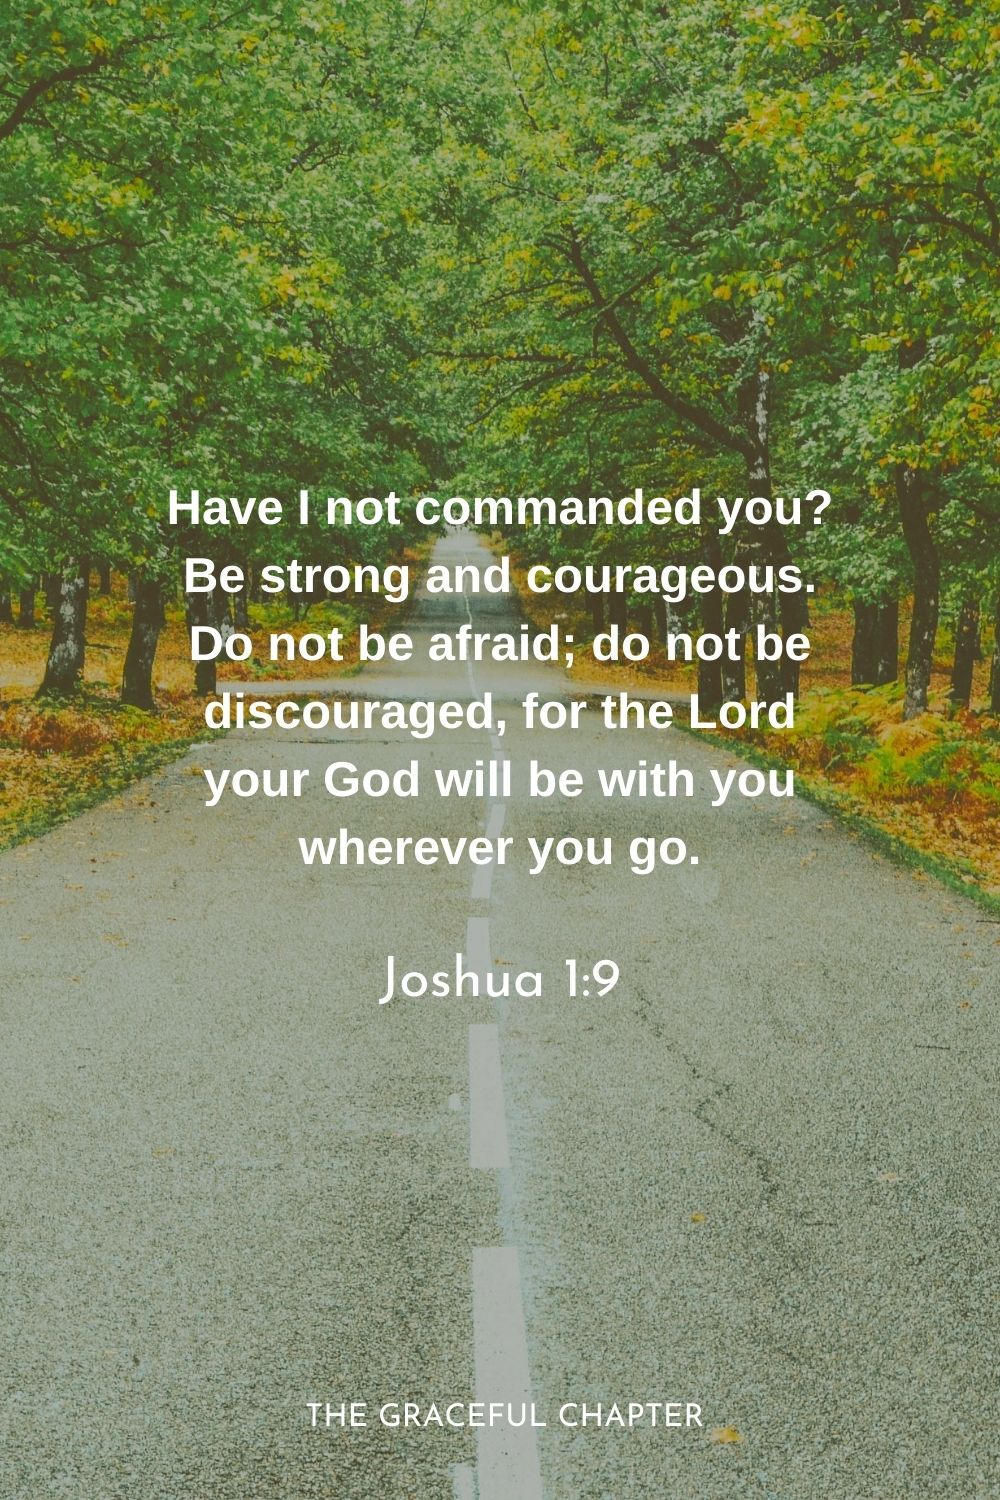 Have I not commanded you? Be strong and courageous. Do not be afraid; do not be discouraged, for the Lord your God will be with you wherever you go.